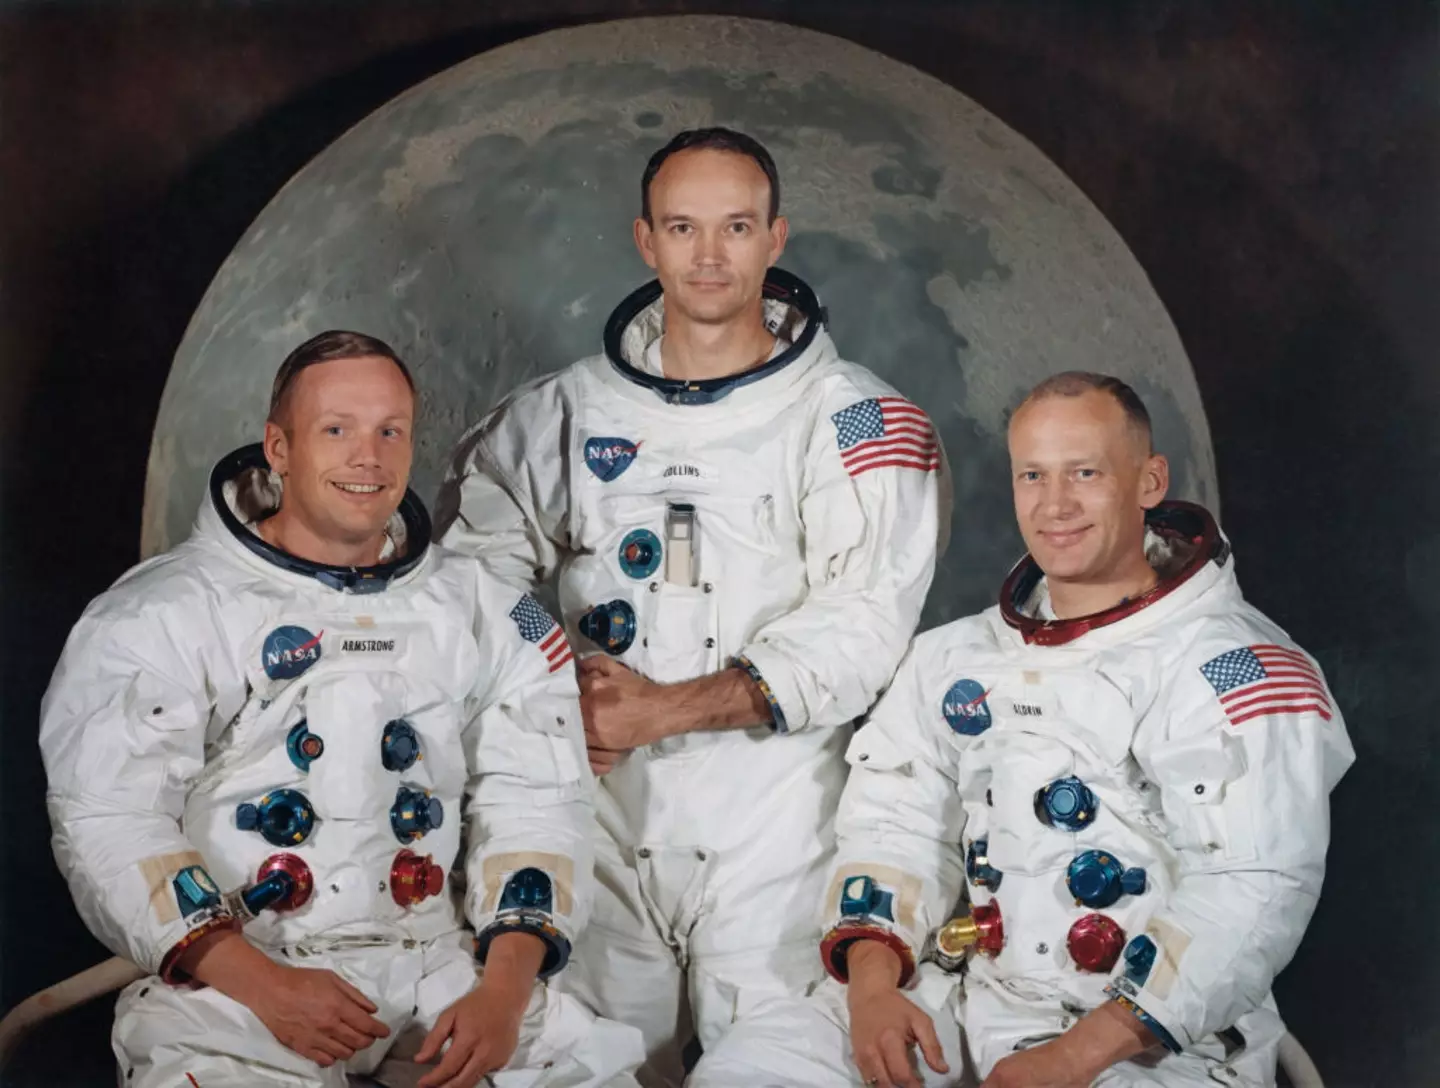 The three crew members of NASA's Apollo 11 lunar landing mission were Neil Armstrong, Michael Collins and Edwin 'Buzz' Aldrin Jr. (Space Frontiers/Getty Images)